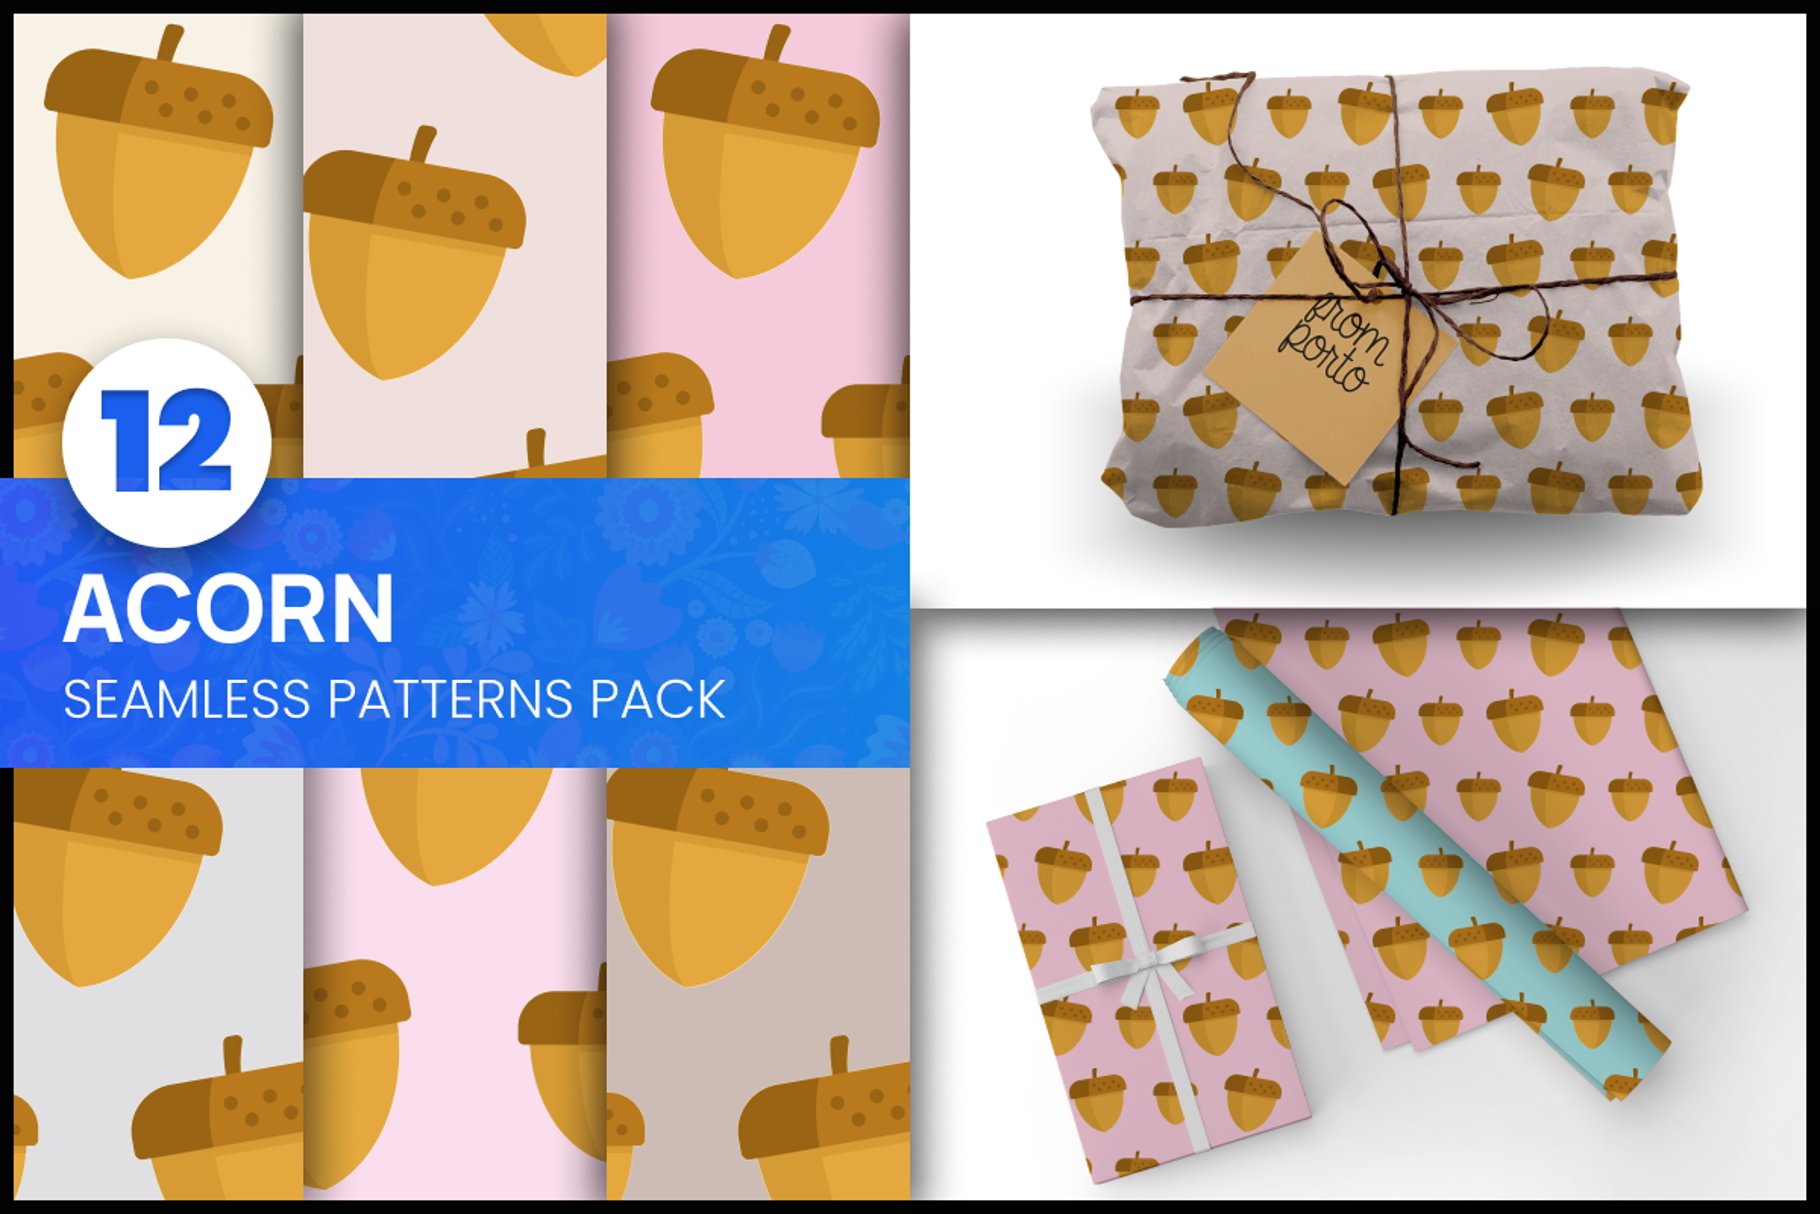 Acorn Seamless Patterns cover image.